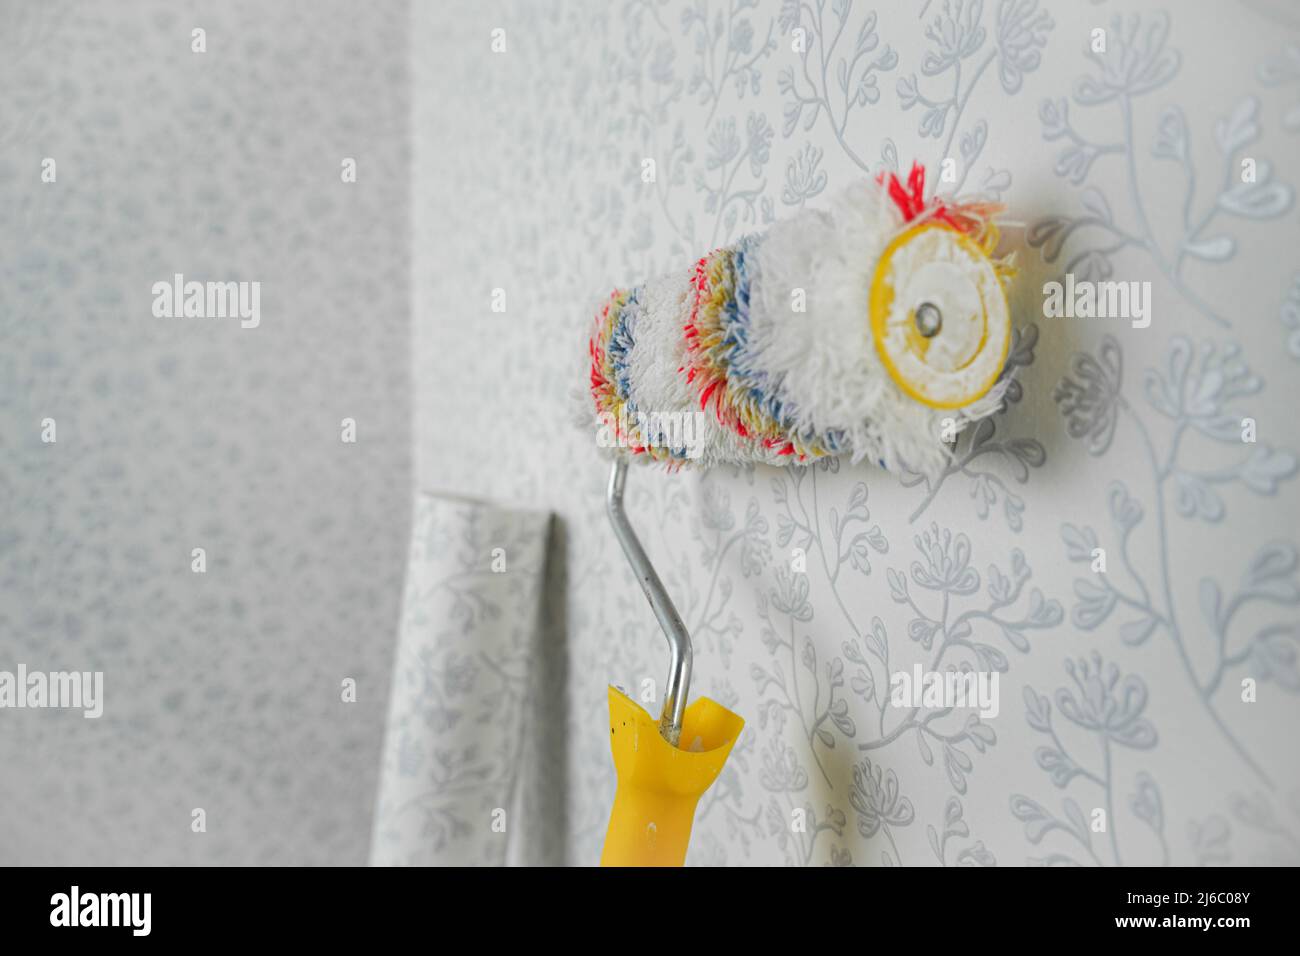 A long-haired roller stands near the wall for whipping wallpaper, a roller with a long handle Stock Photo